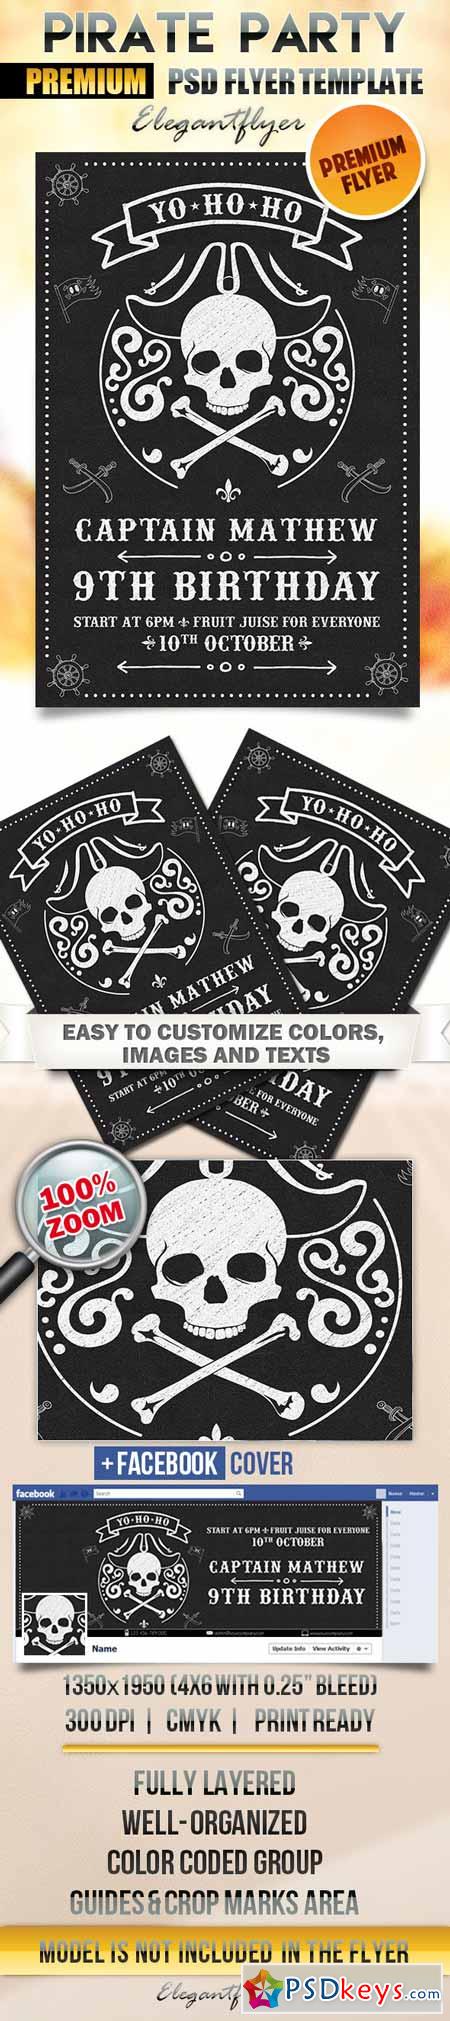 Pirate Party  Flyer PSD Template + Facebook Cover